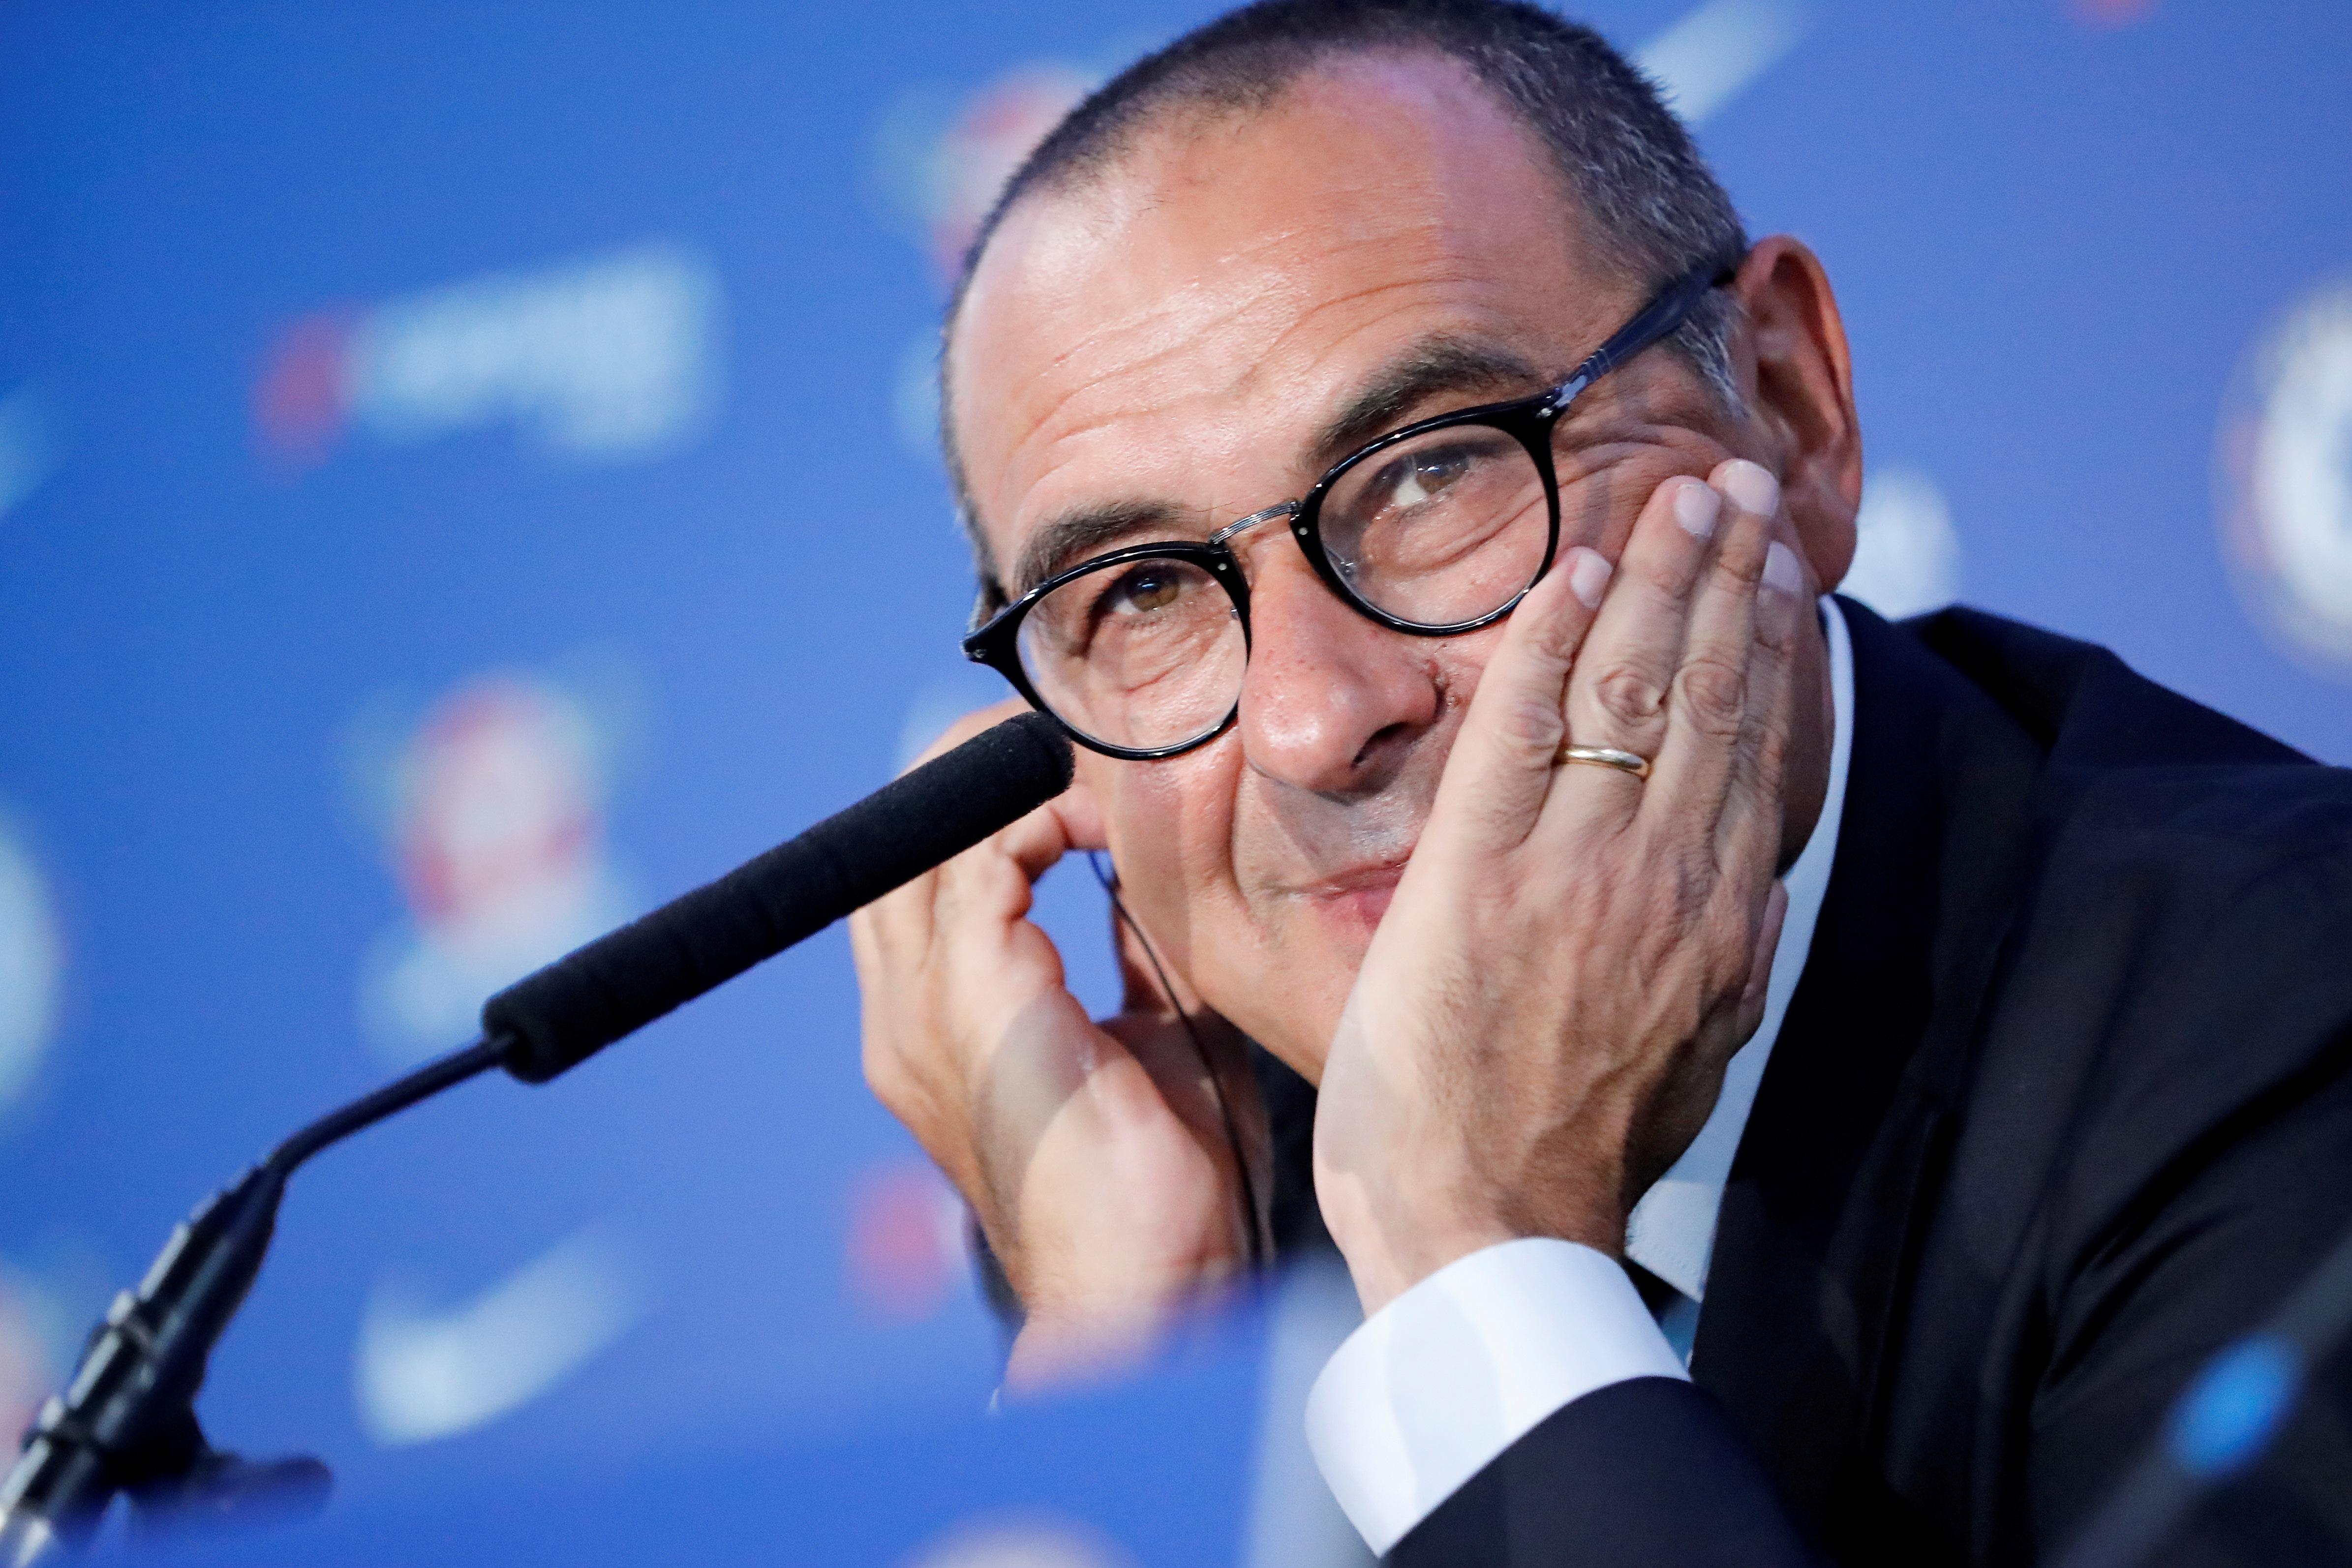 Chelsea boss Maurizio Sarri believes it is more important to have fun than to win